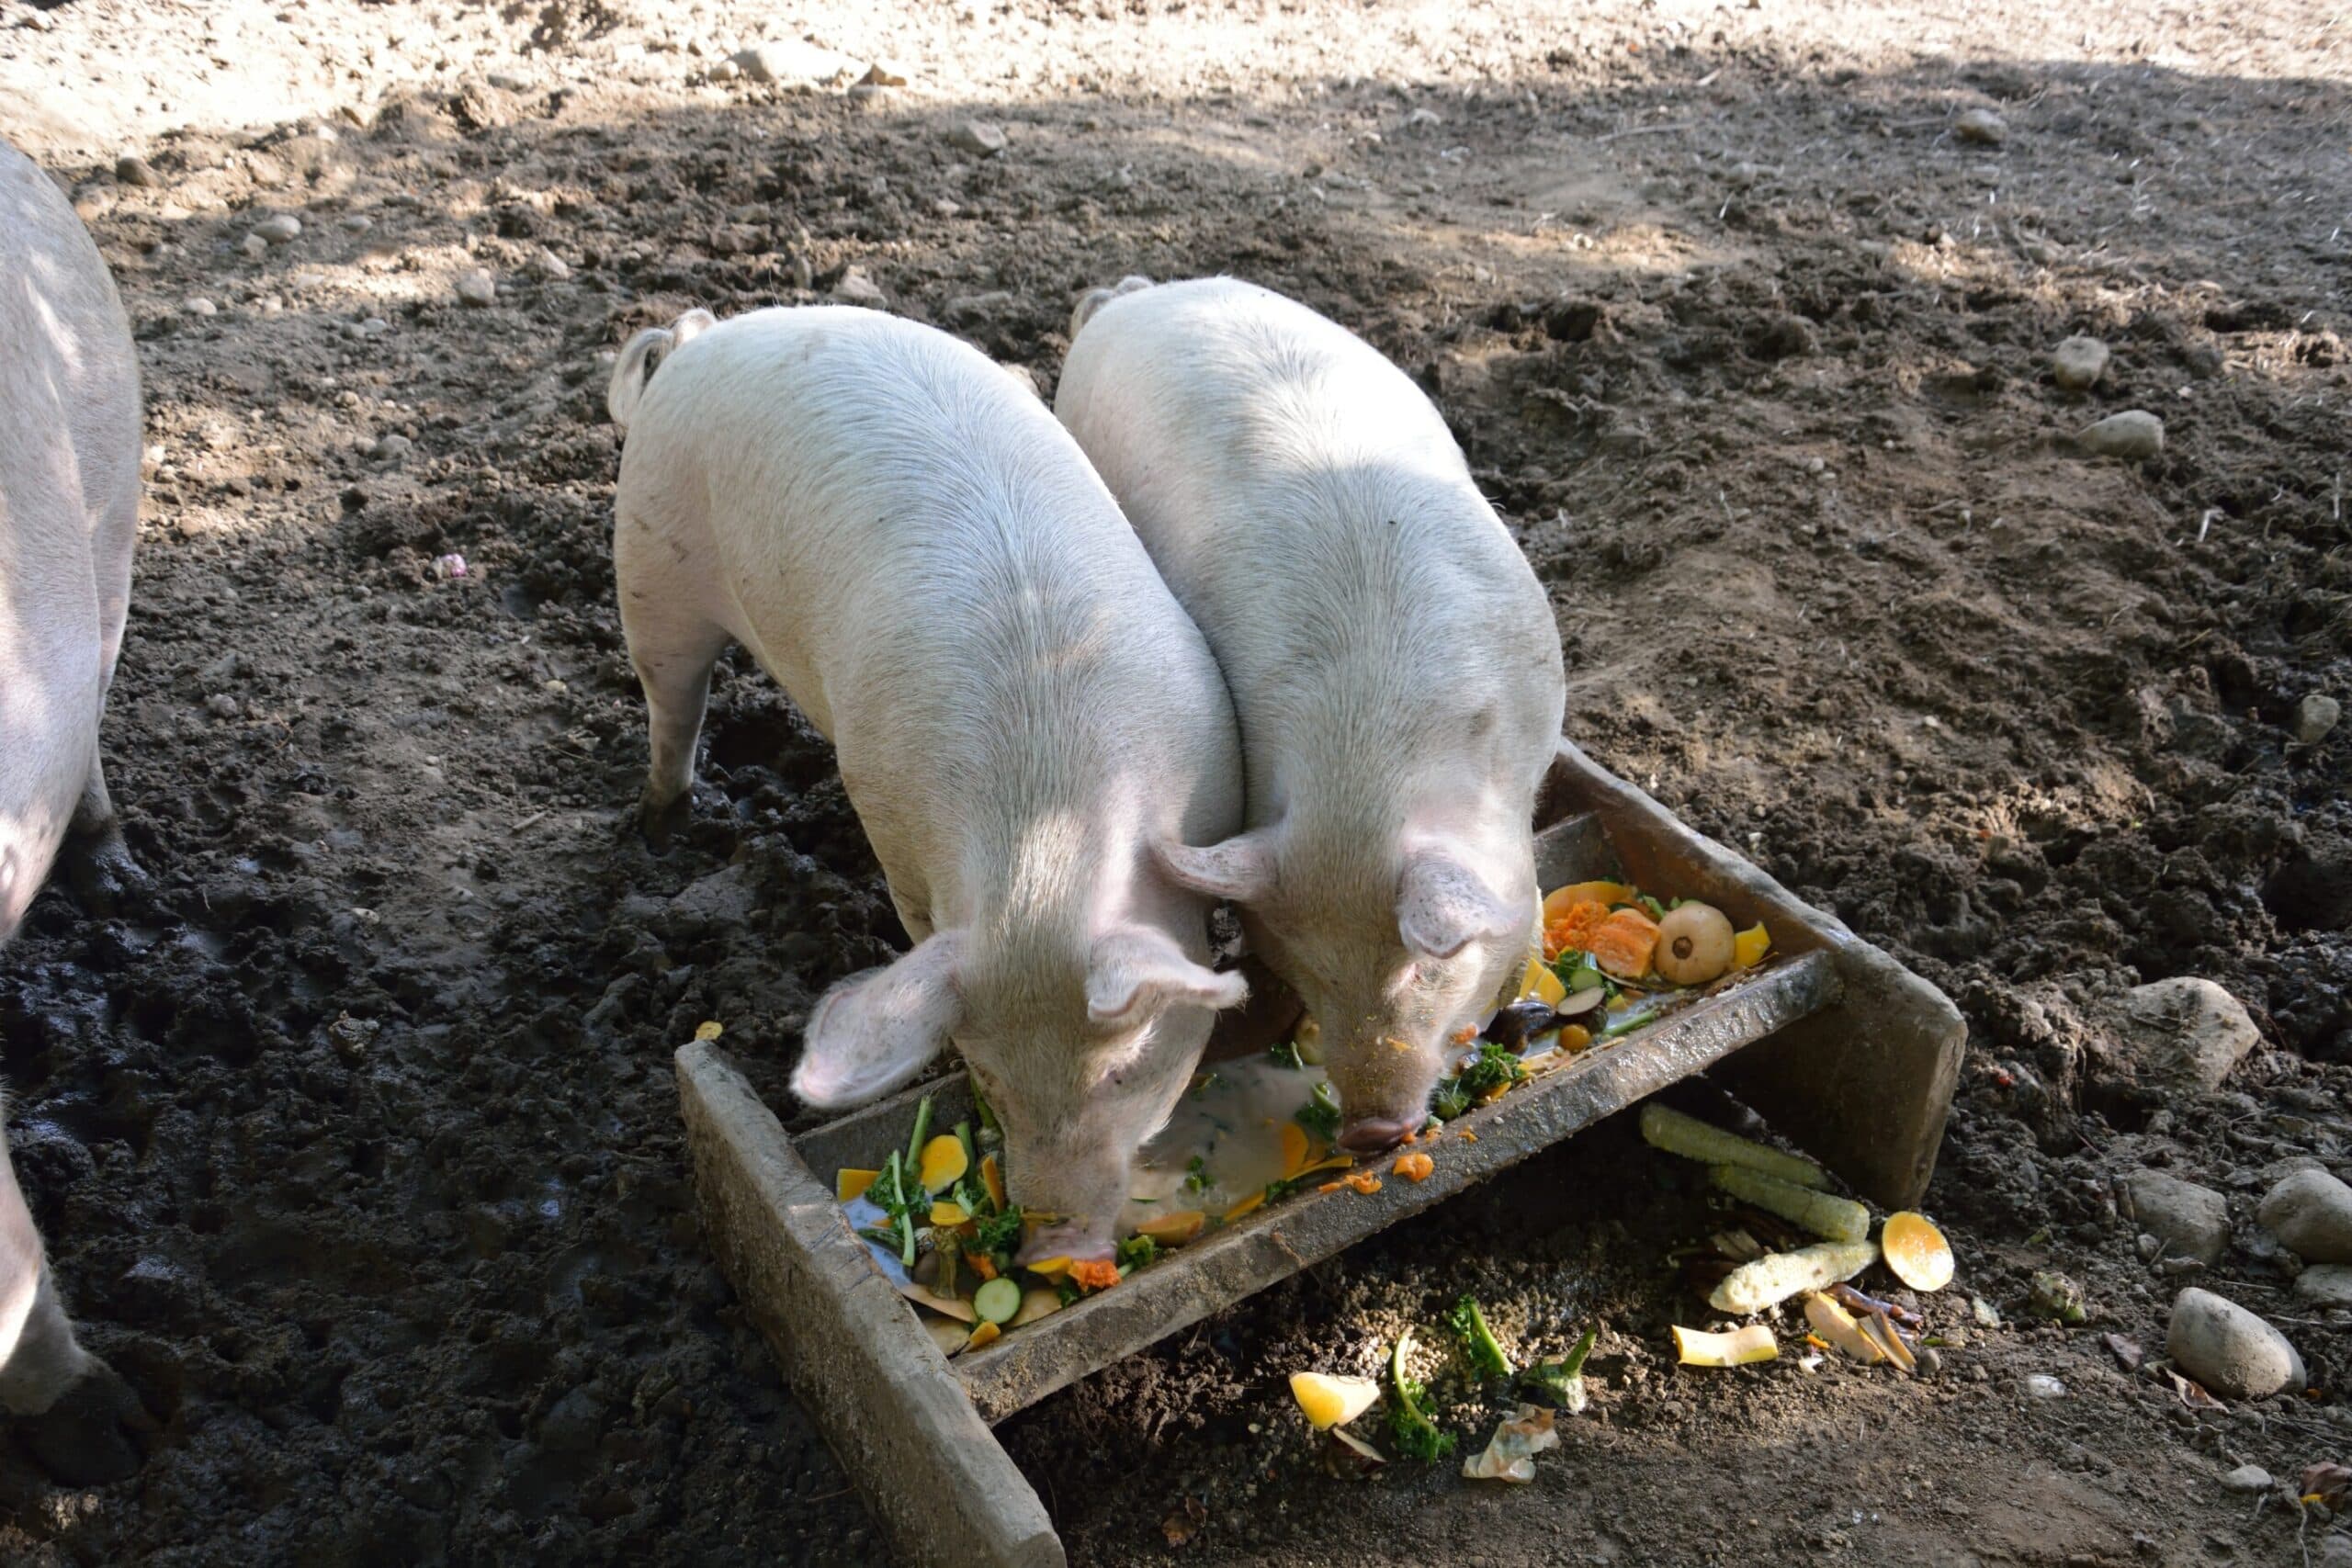 Two,Pigs,Eating,At,A,Trough,In,A,Pig,Pen